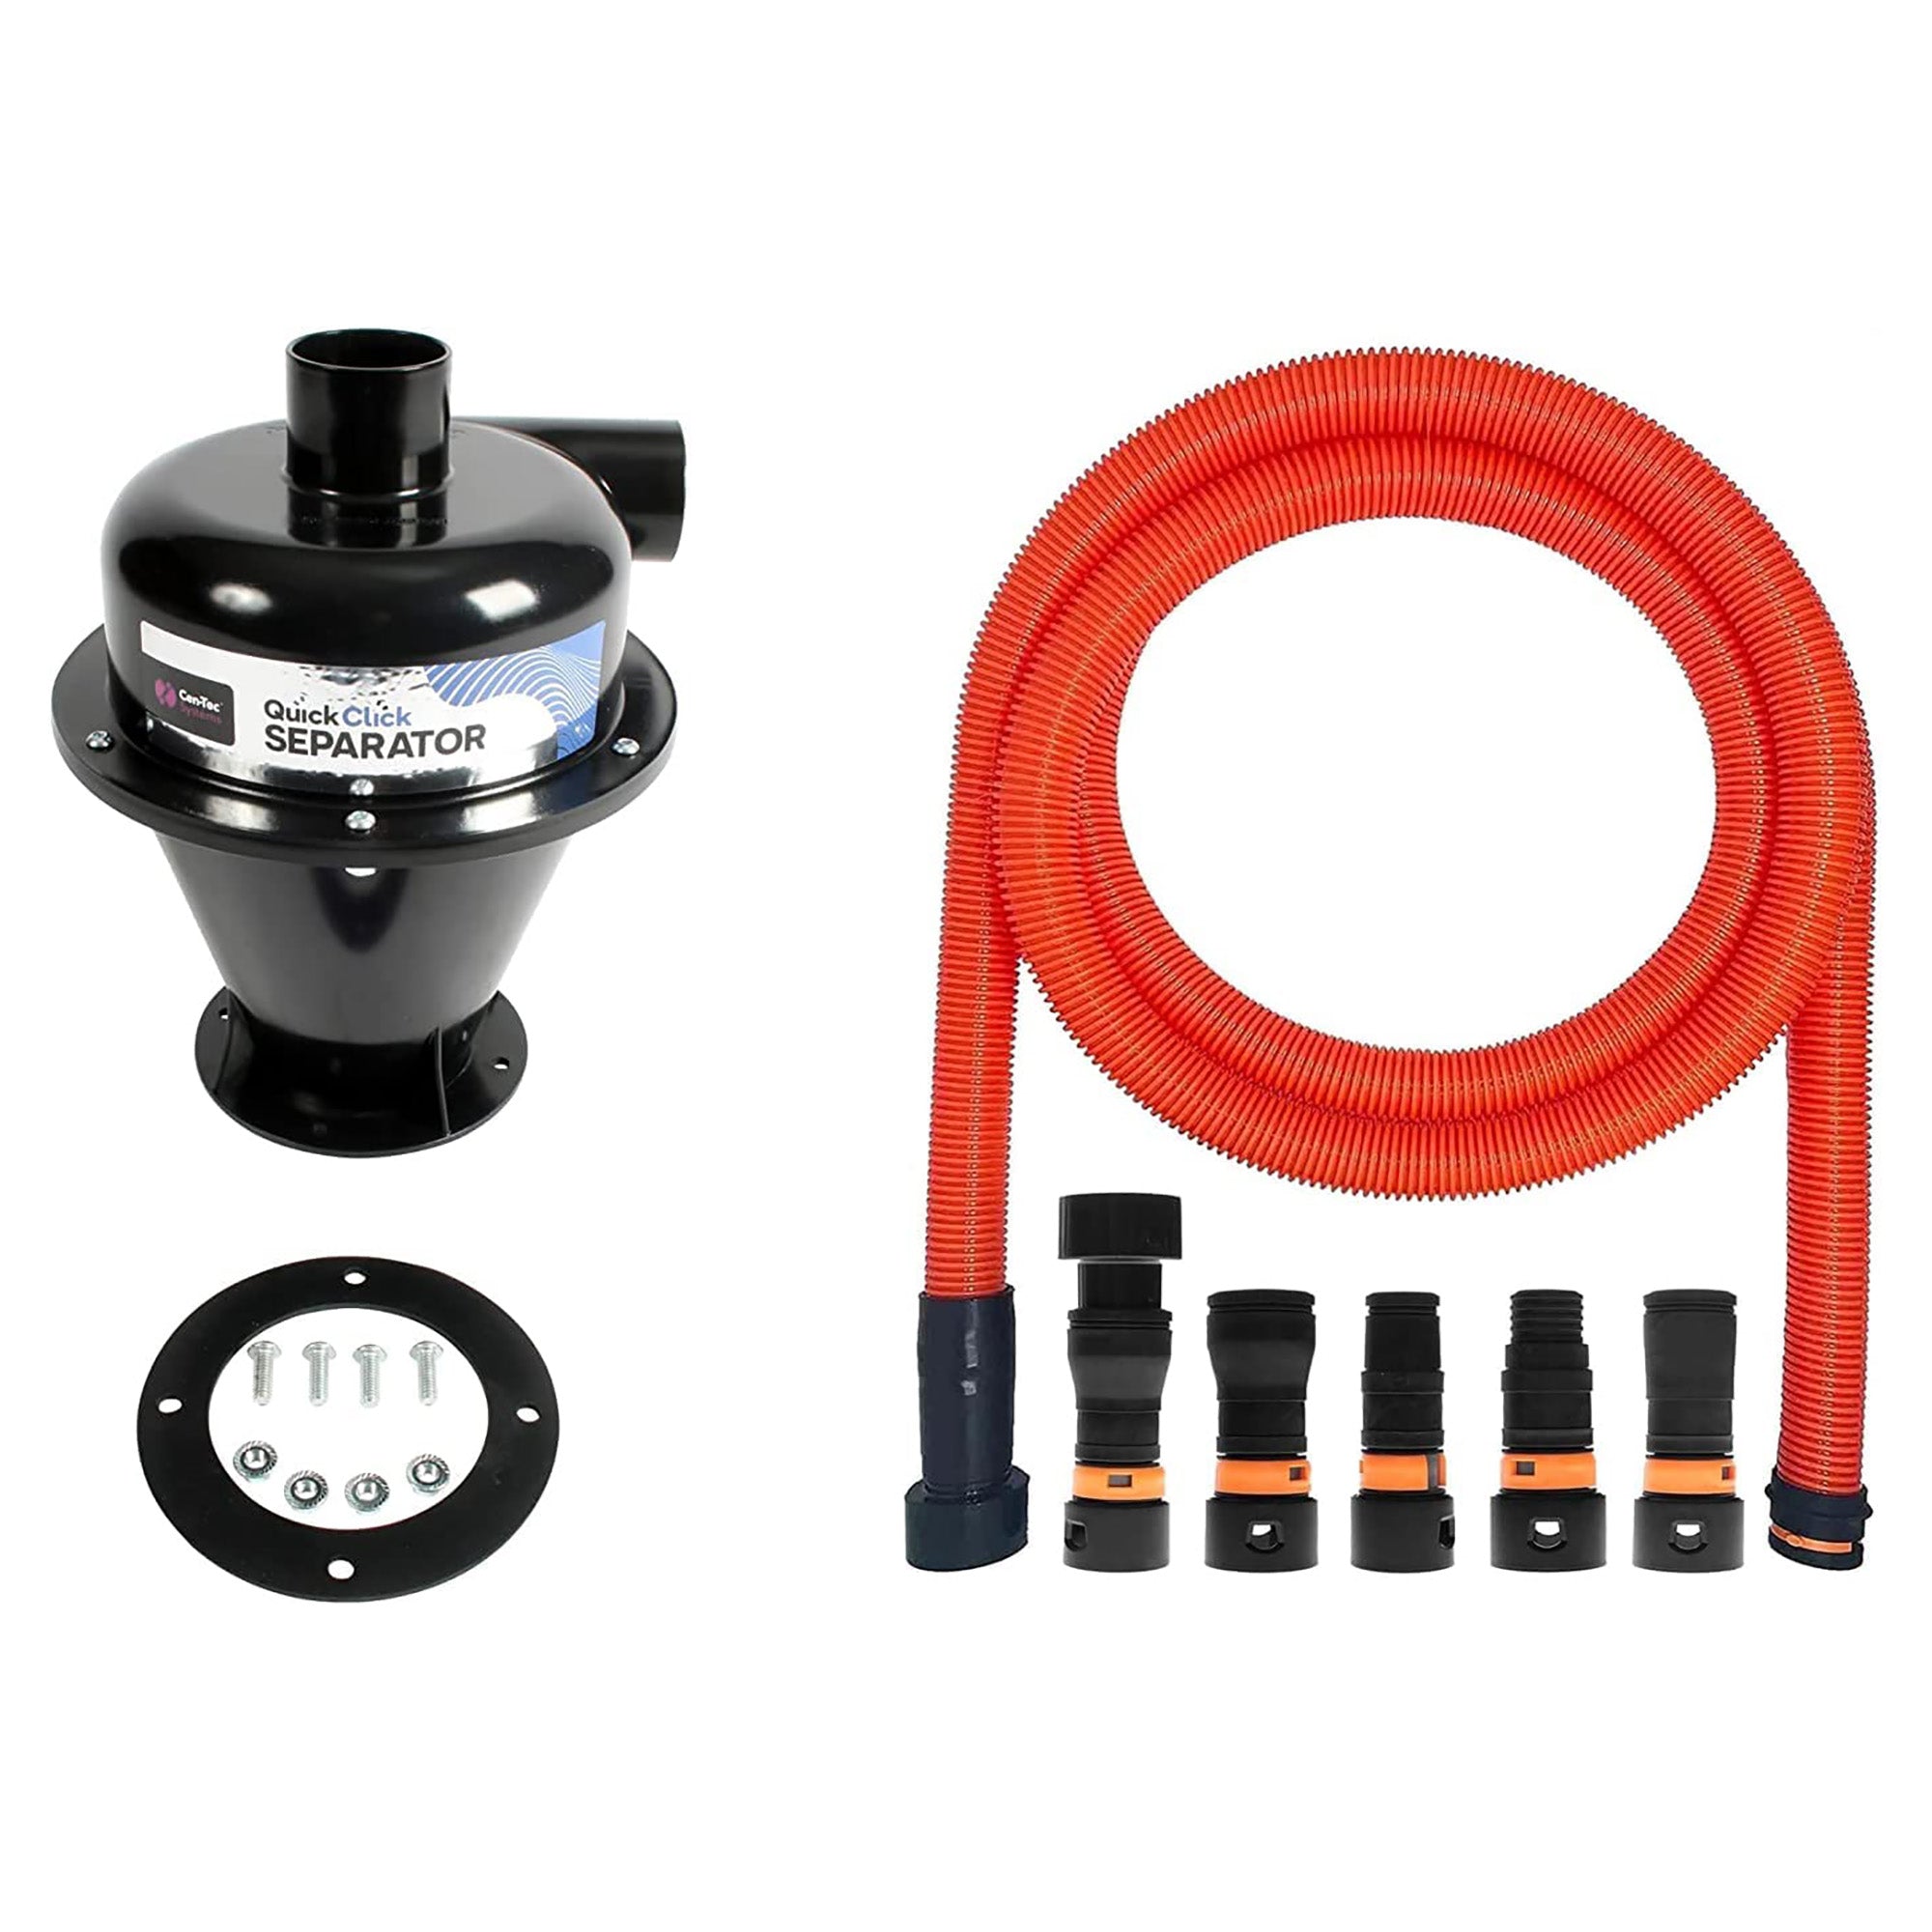 VPC Quick Click Dust Collection Hose for Home and Shop Vacuums with Wet/Dry Cyclonic Separator